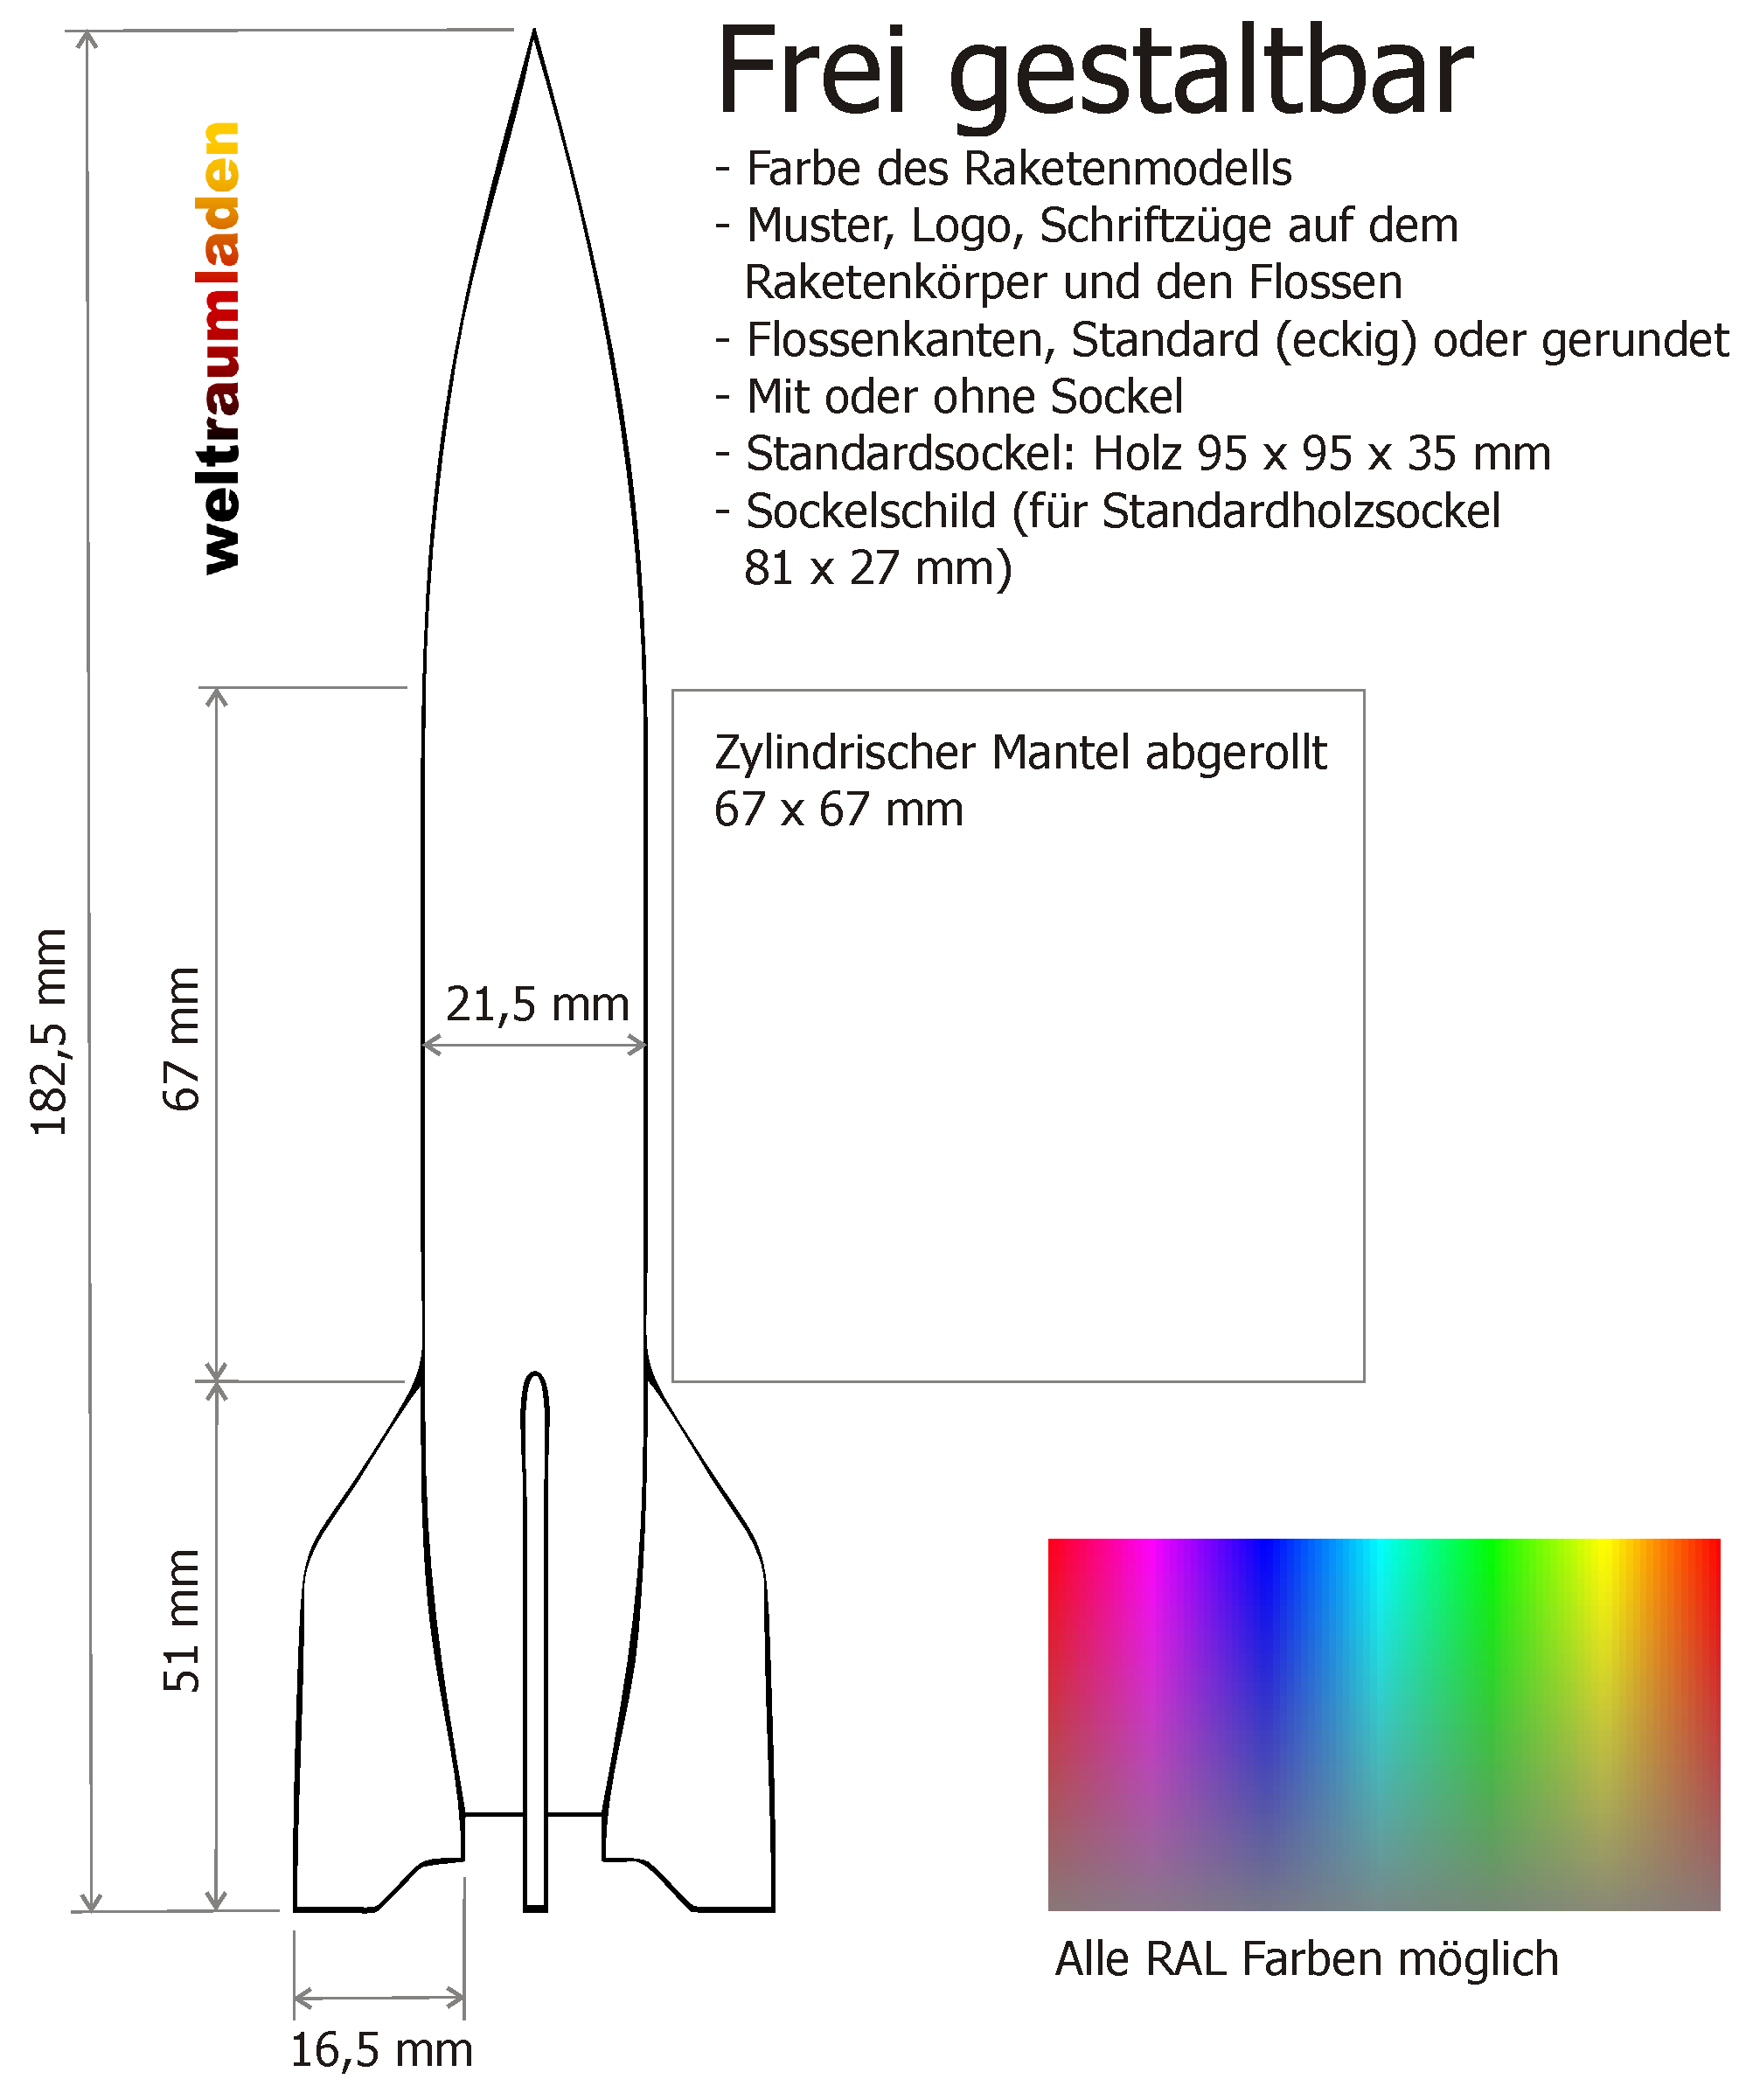 Individual rocket models according to your ideas - weltraumladen